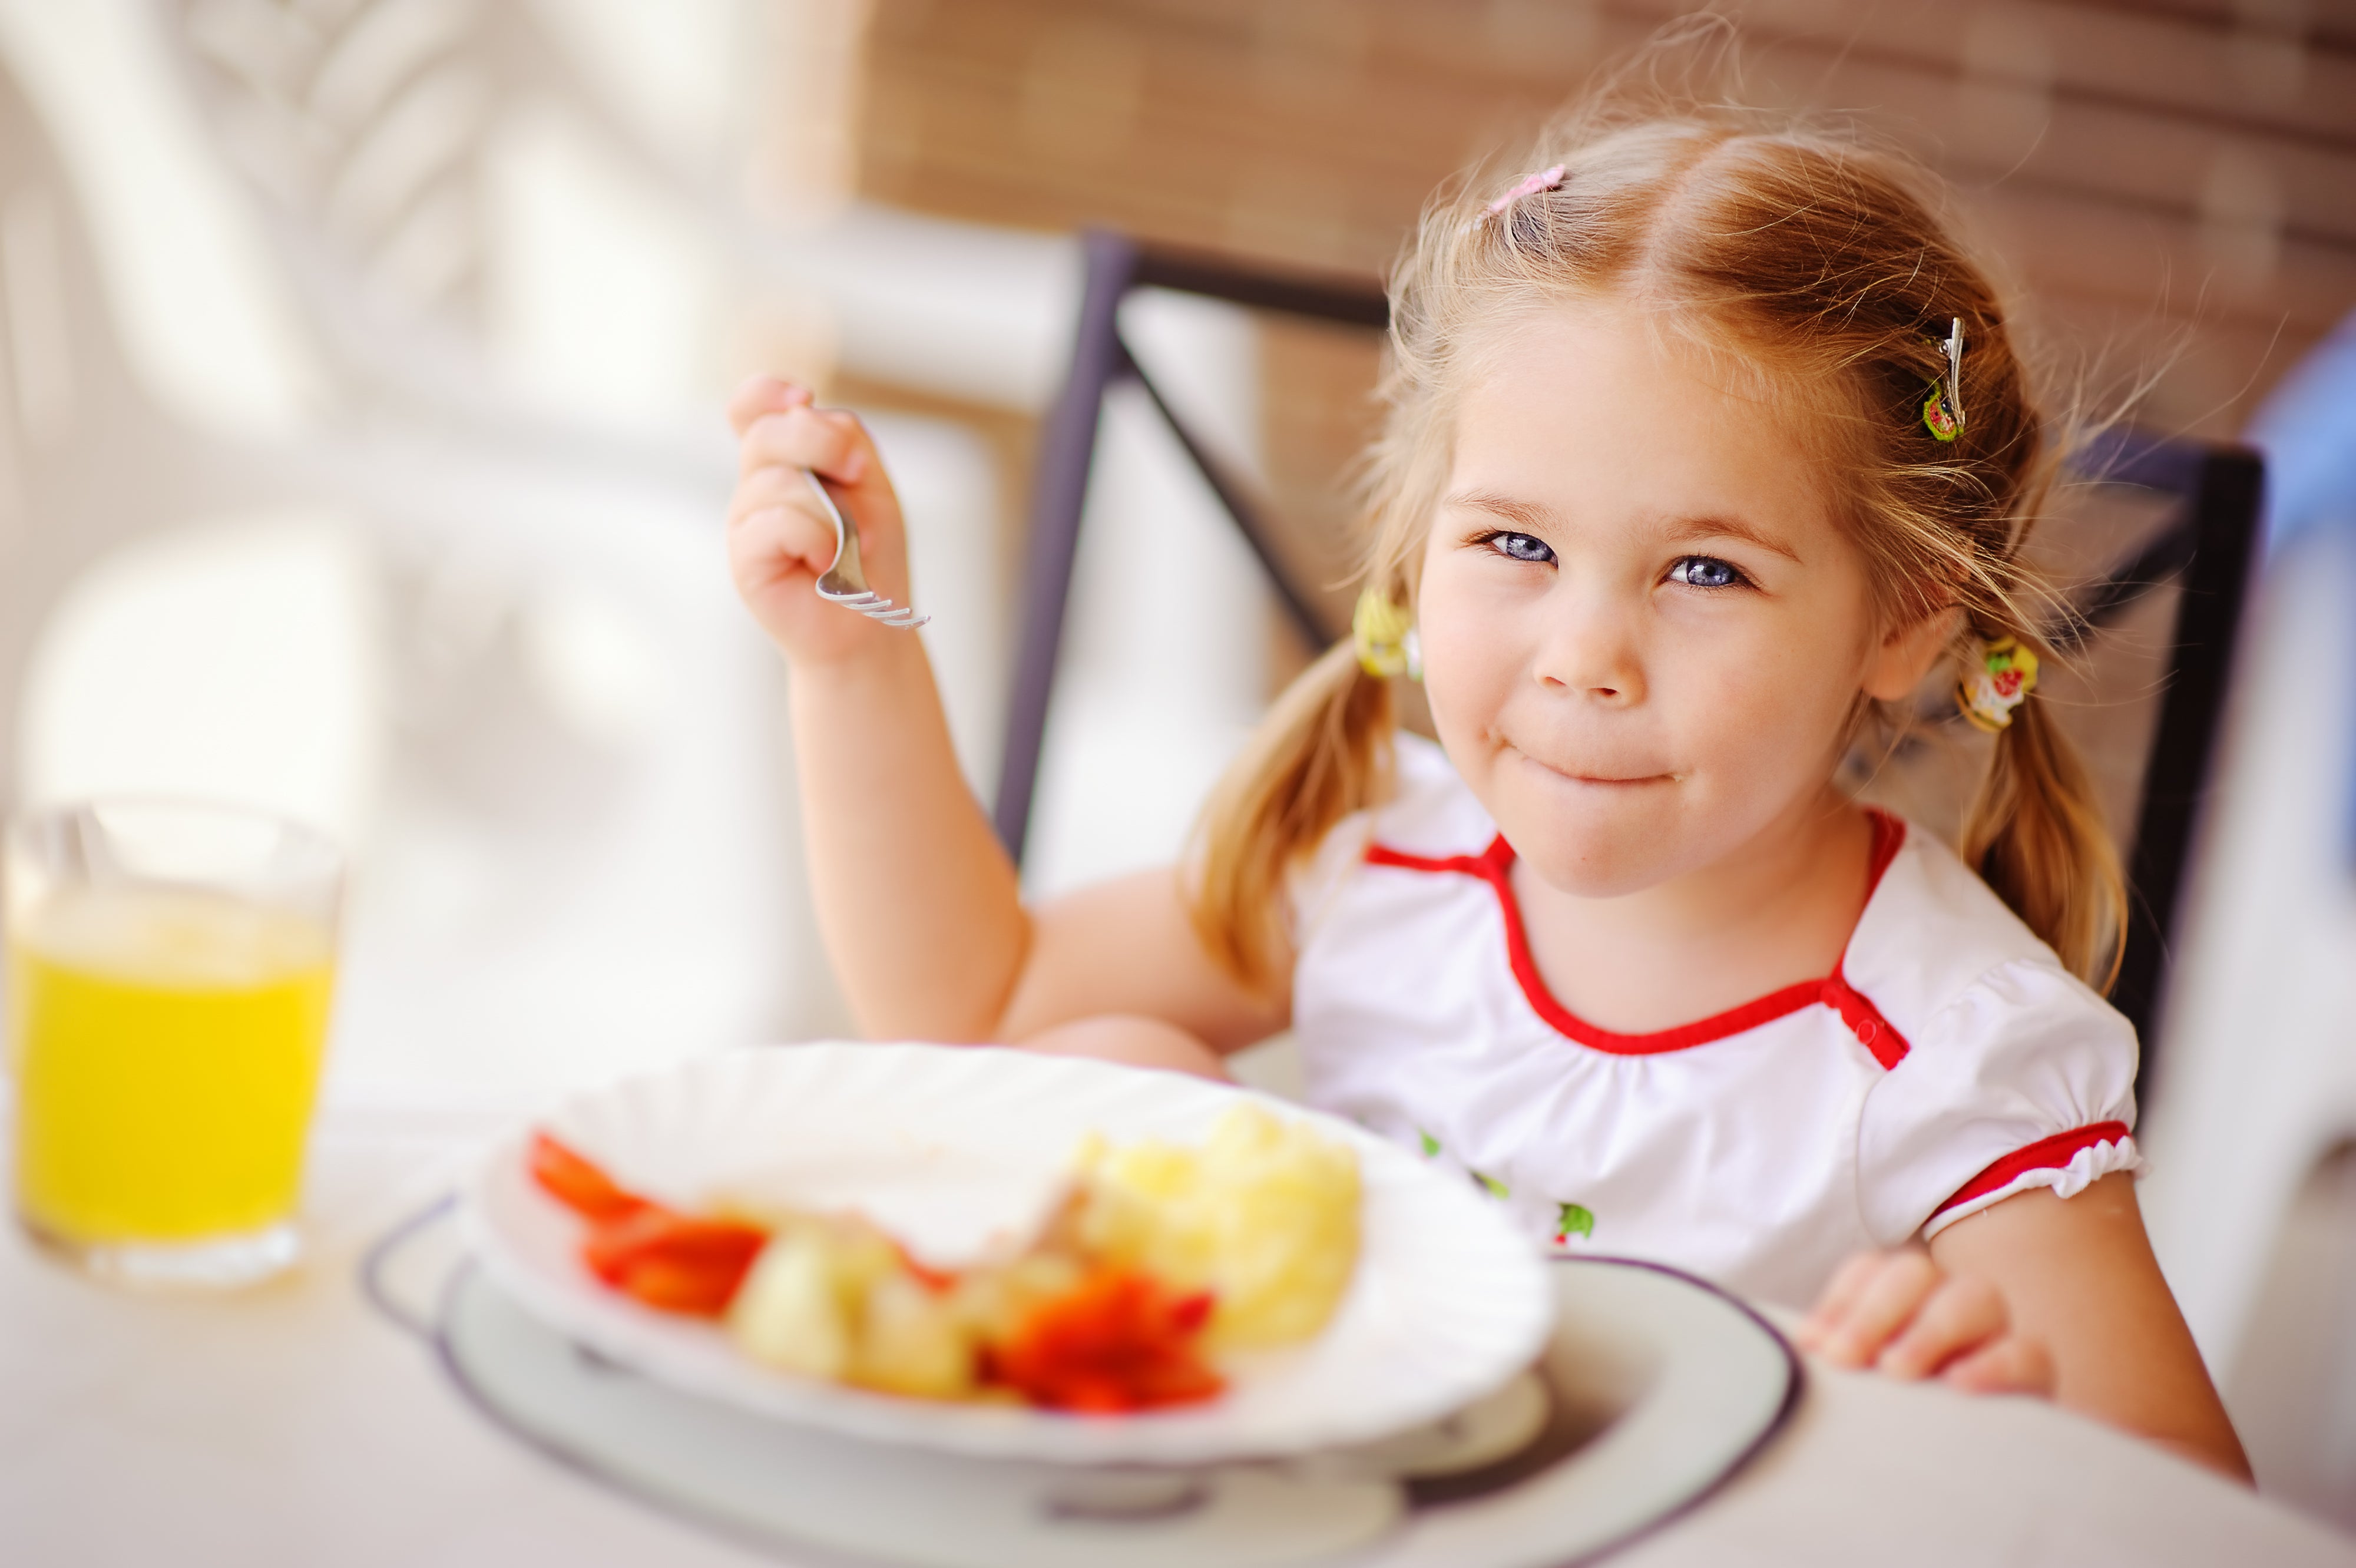 Nutrition for girls: from birth to adulthood